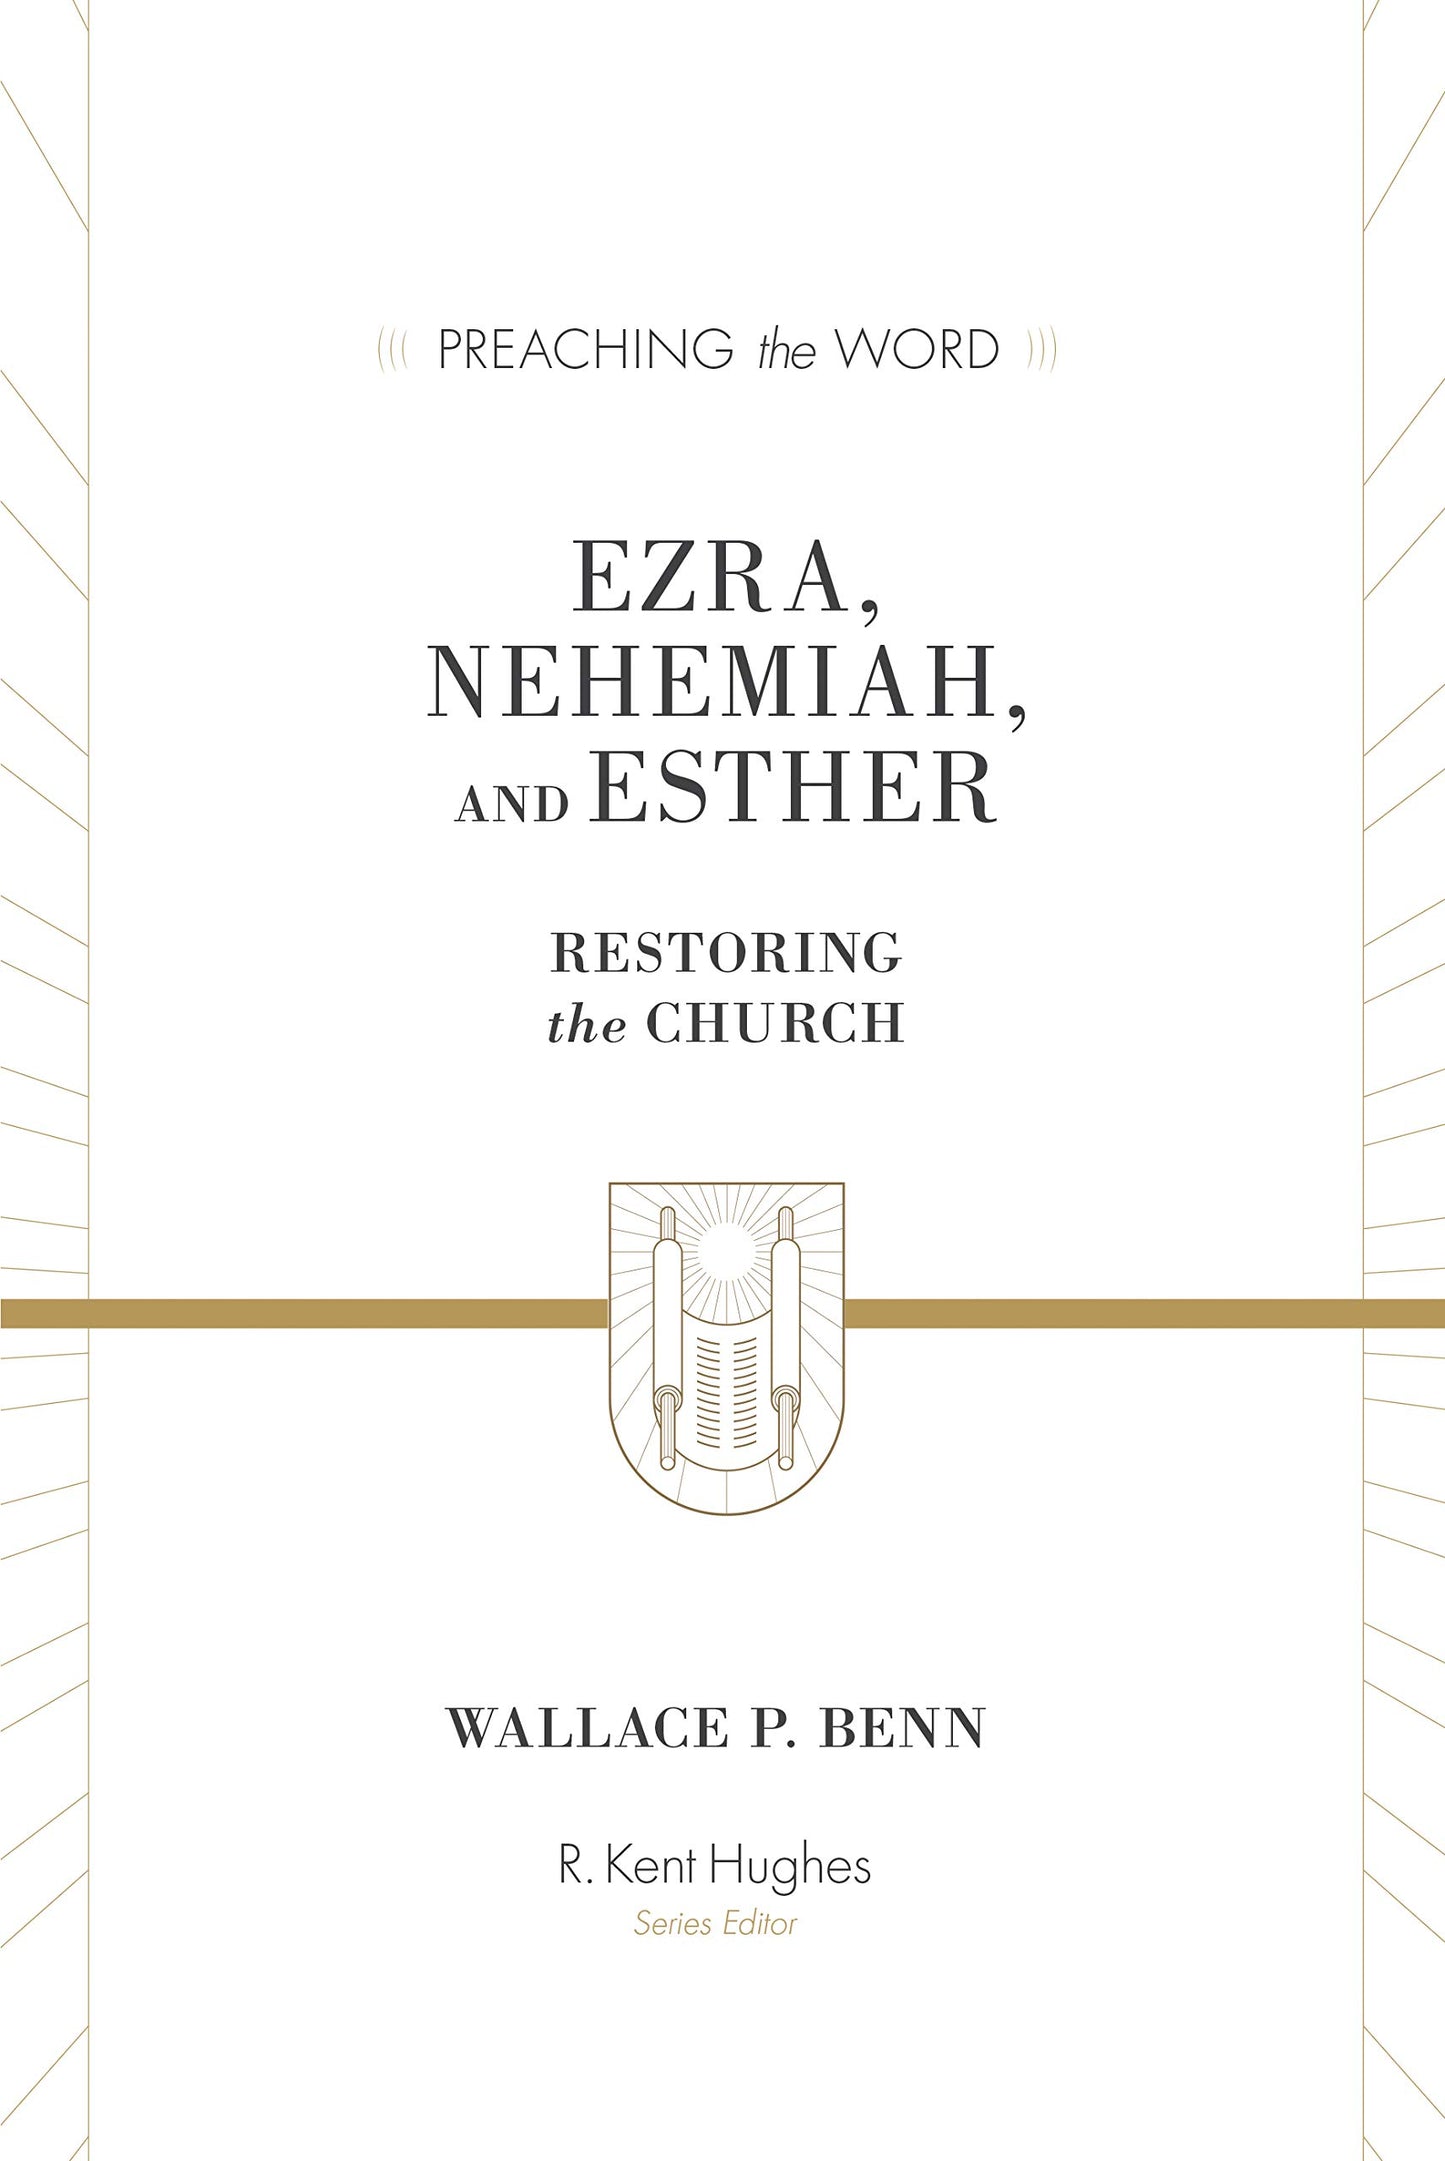 Ezra, Nehemiah, and Esther: Restoring the Church (Preaching the Word) (Commentary)